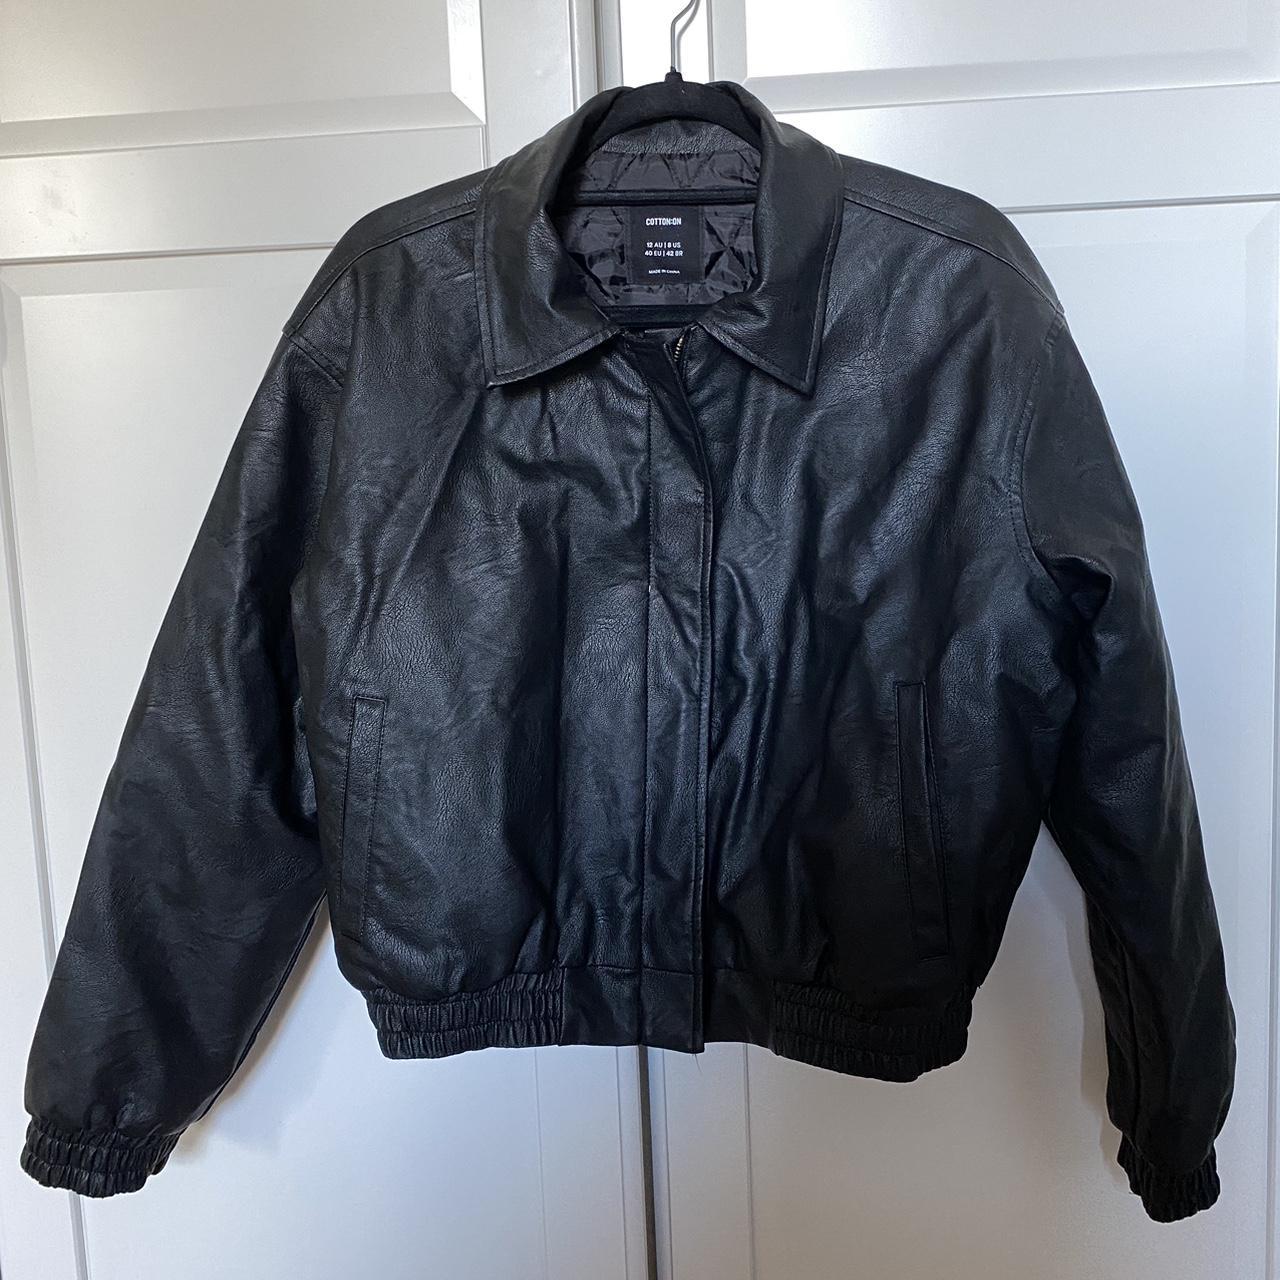 Cotton On faux leather Jacket BRAND NEW 😎 Bomber... - Depop